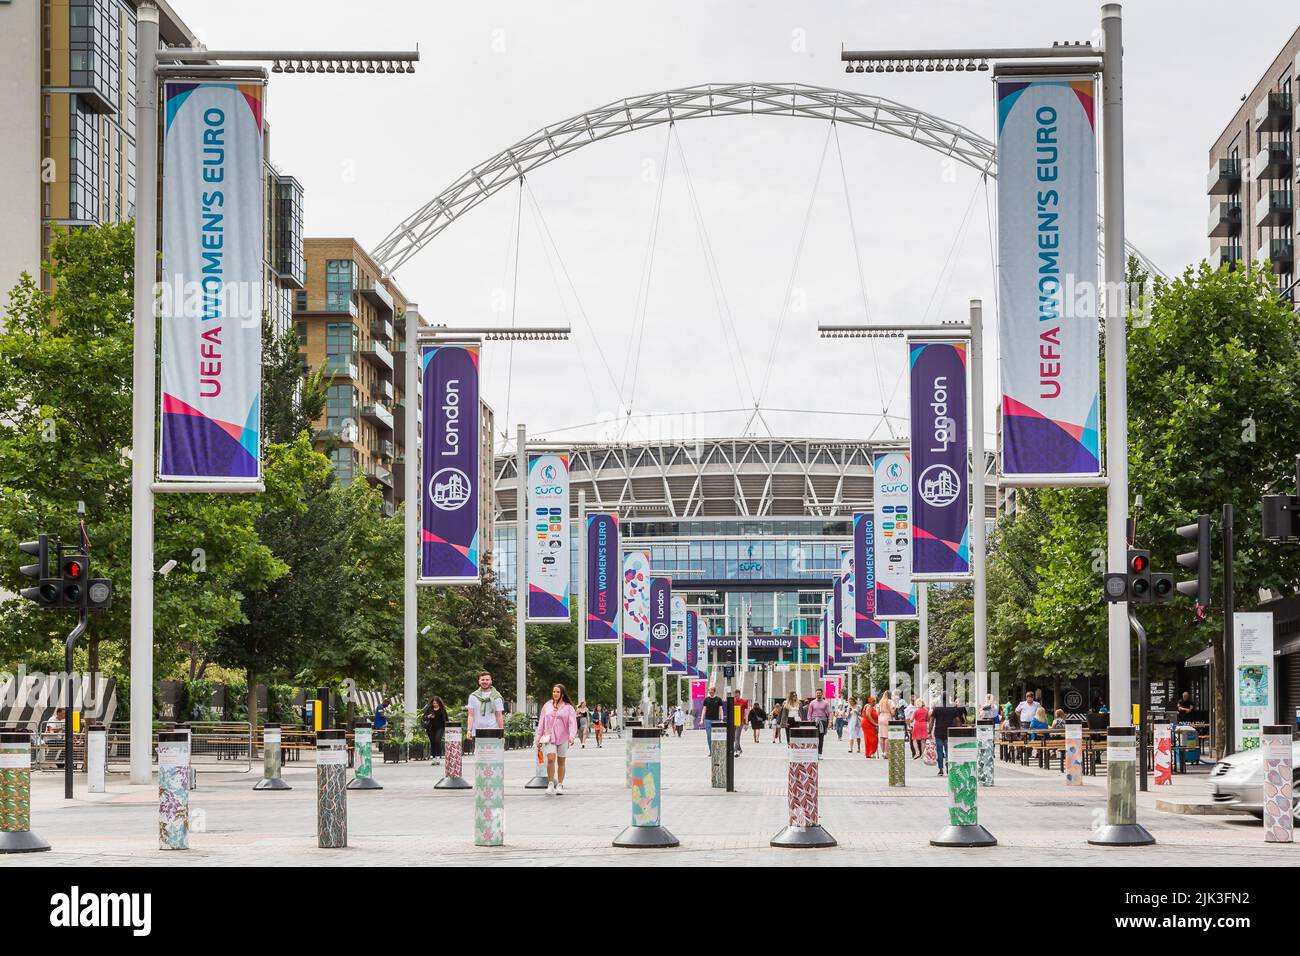 Wembley Stadium, London,UK. 30th July 2022.Banners displayed on Olympic Way ahead of the Women's UEFA European Football Championship Final held at Wembley Stadium tomorrow. England's Lionesses beat Sweden 4-0 in the Semi Finals earlier this week and will face Germany in UEFA Women's EURO final on Sunday 31 July 2022 at Wembley Stadium. Amanda Rose/Alamy Live News Stock Photo